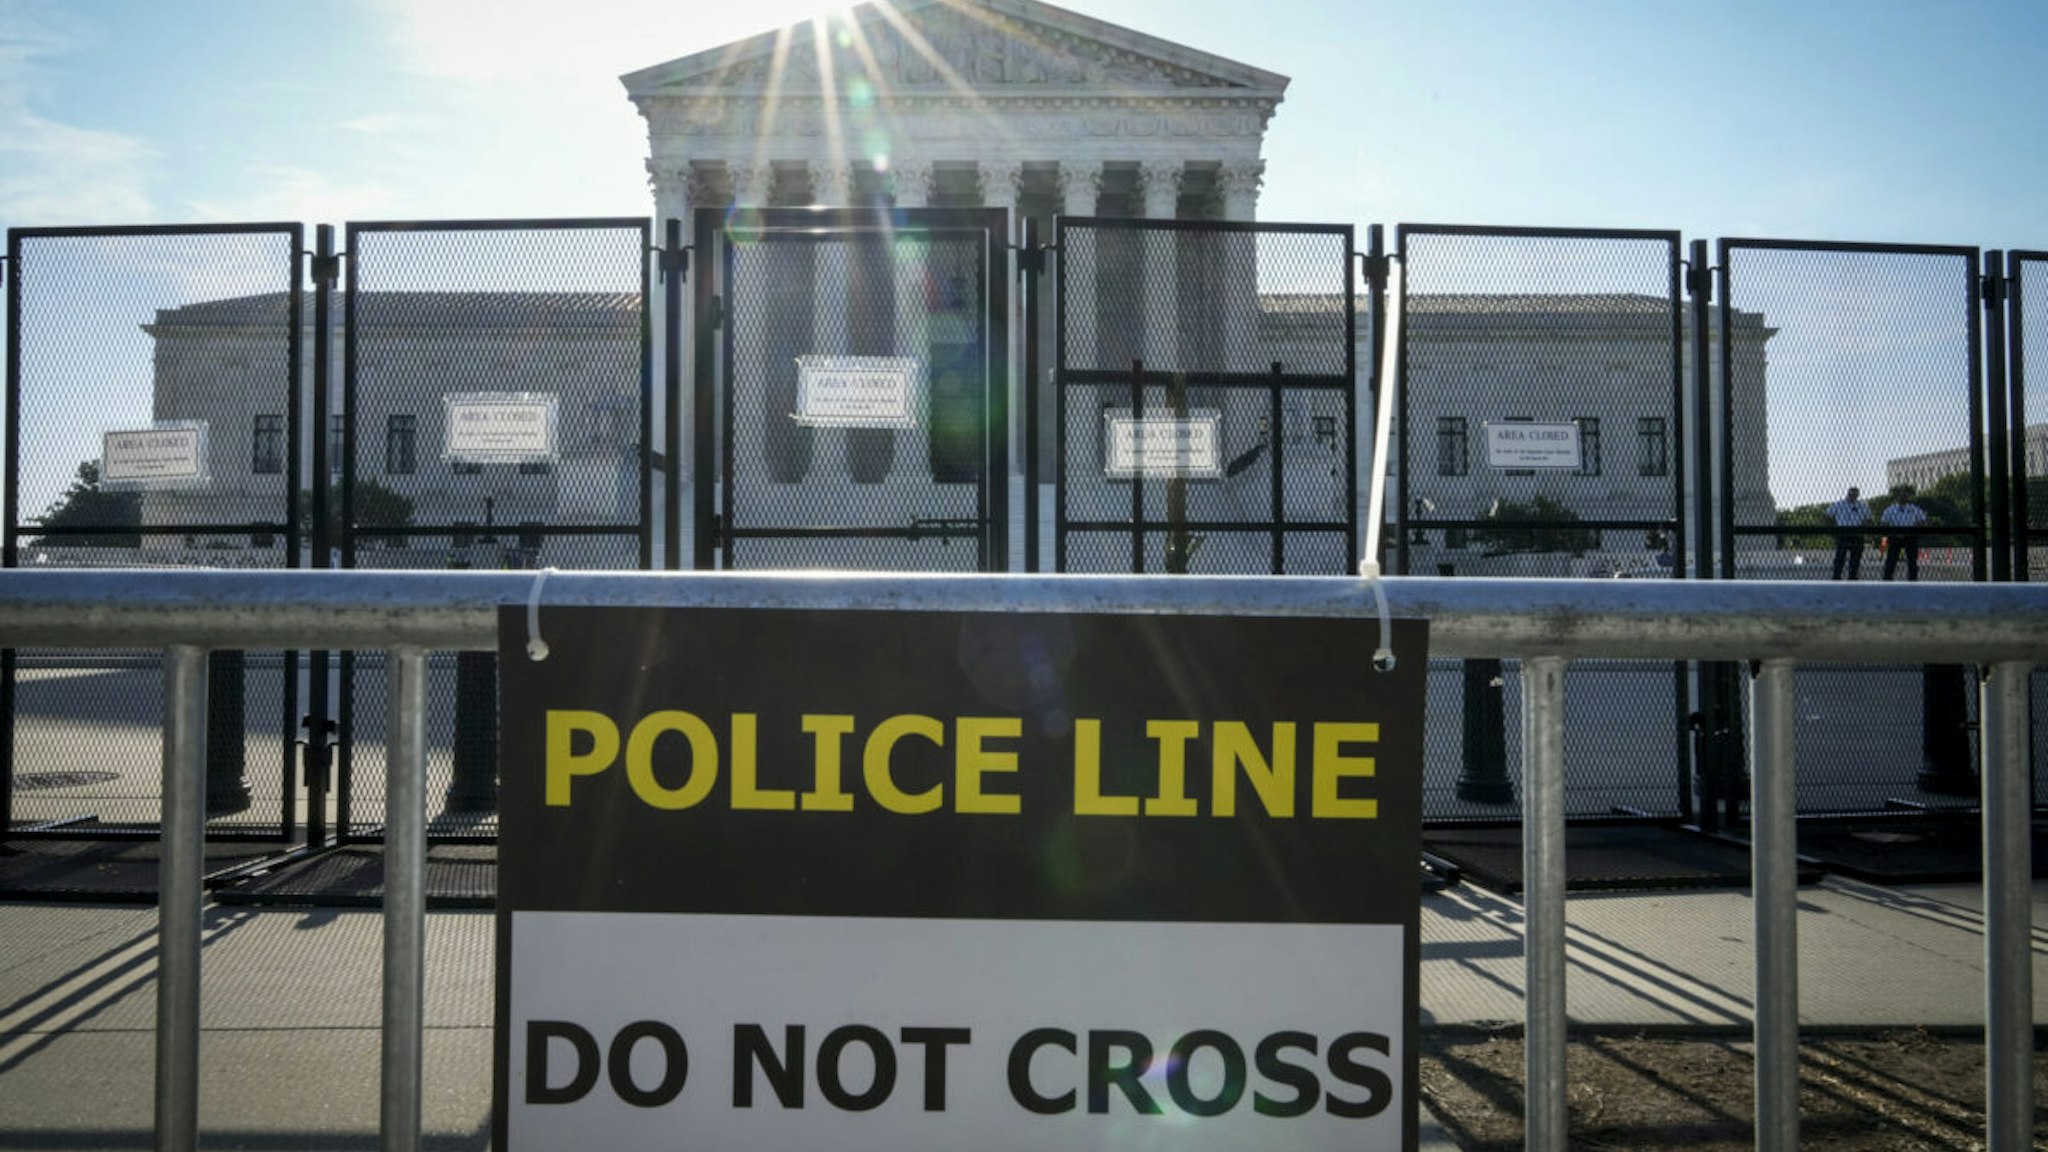 A view of the U.S. Supreme Court through security fencing on May 31, 2022 in Washington, DC. According to media reports, Supreme Court officials are escalating their search for the source of the leaked draft opinion that would overturn Roe v. Wade